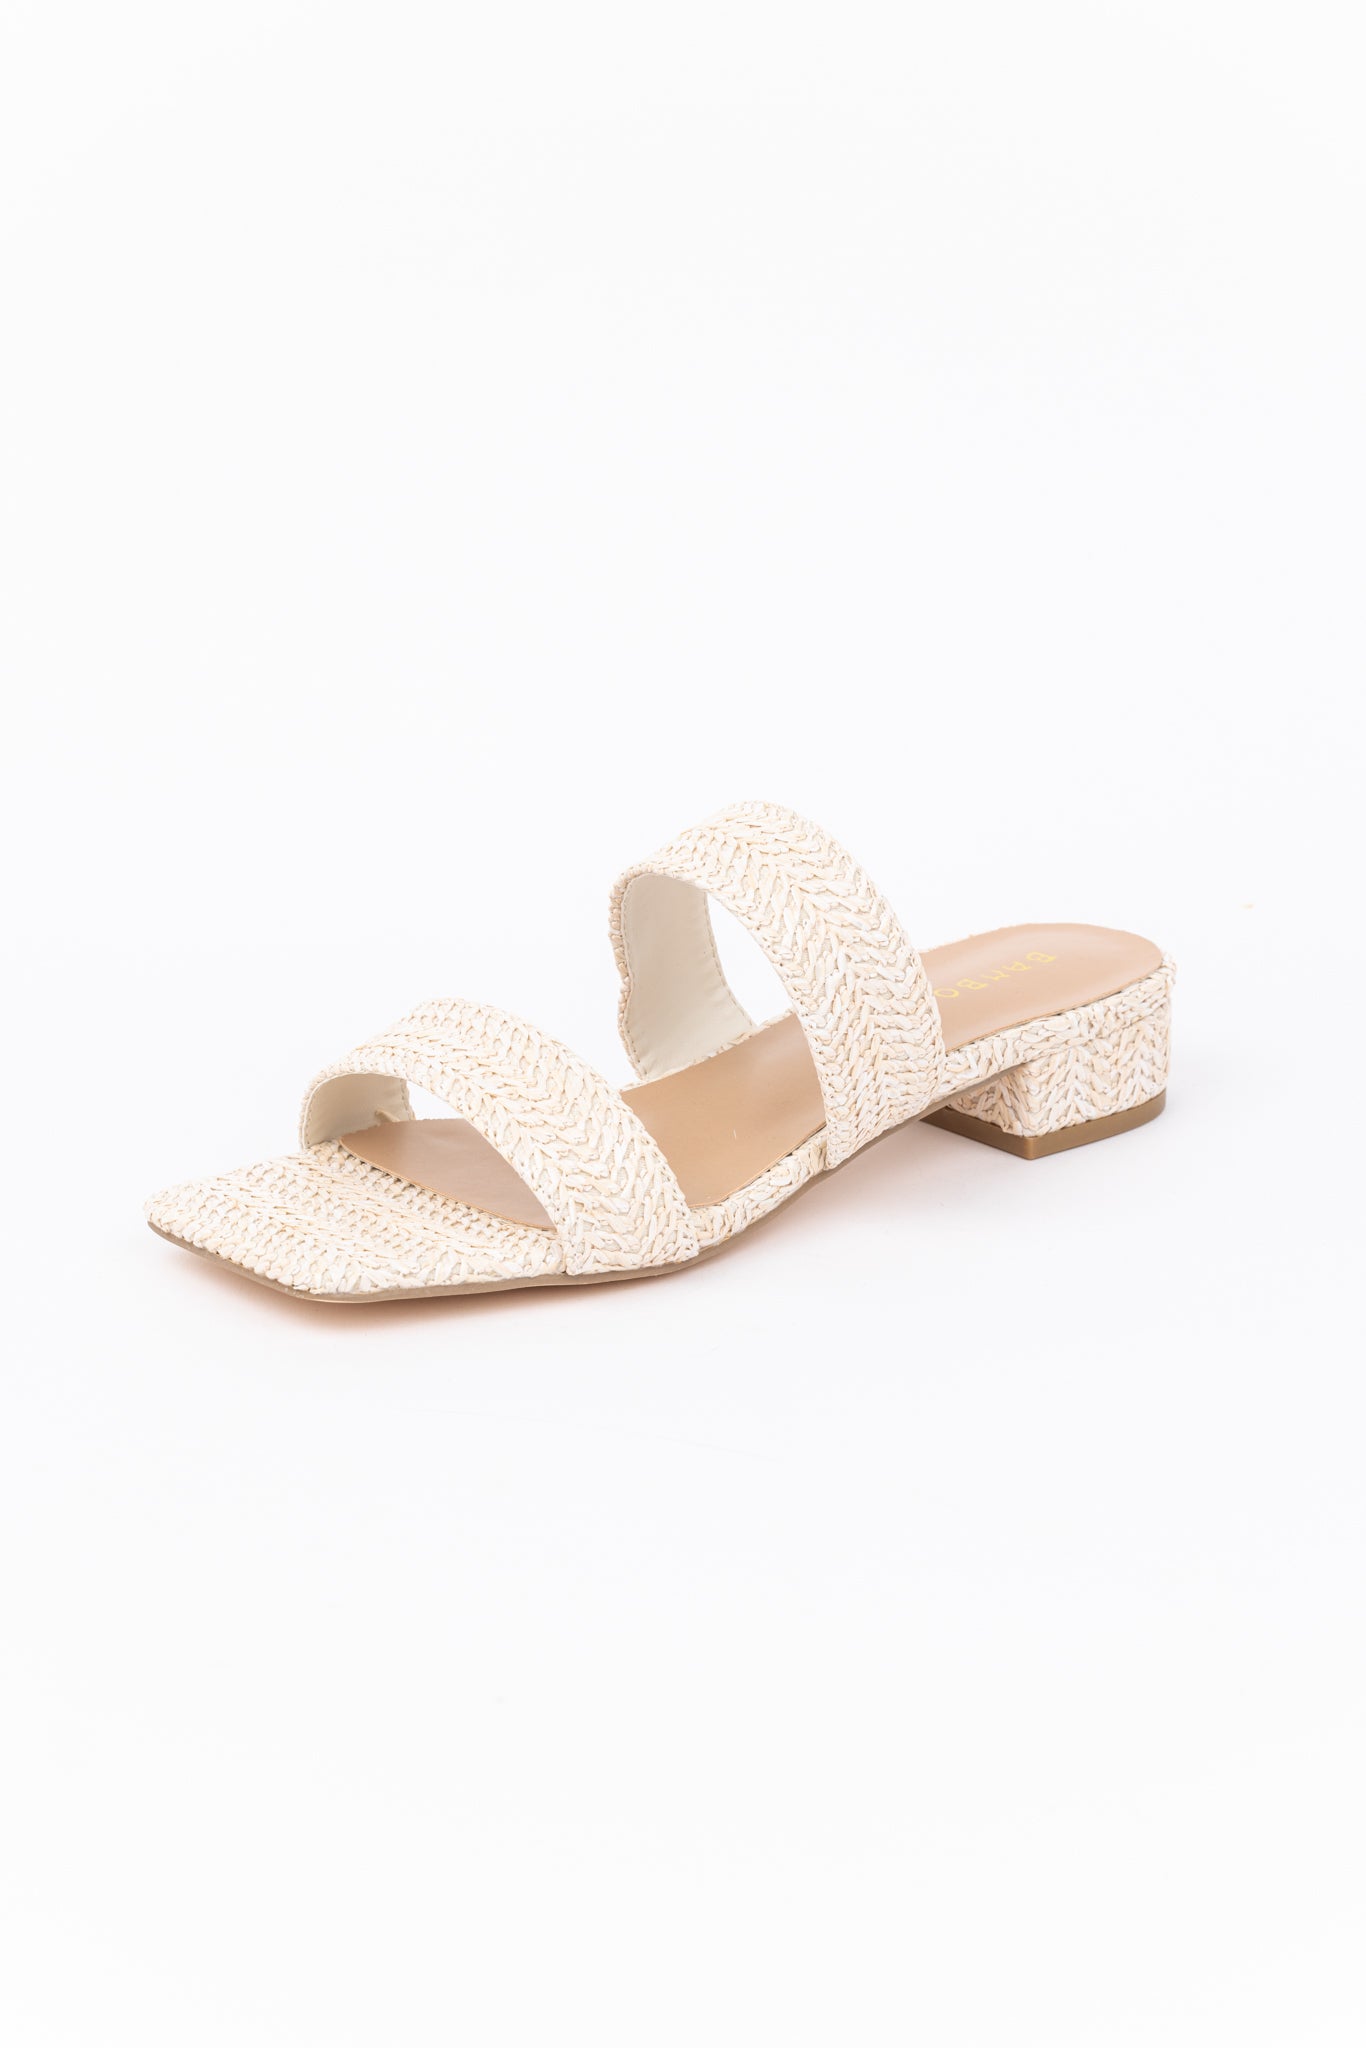 Shelby Sandals